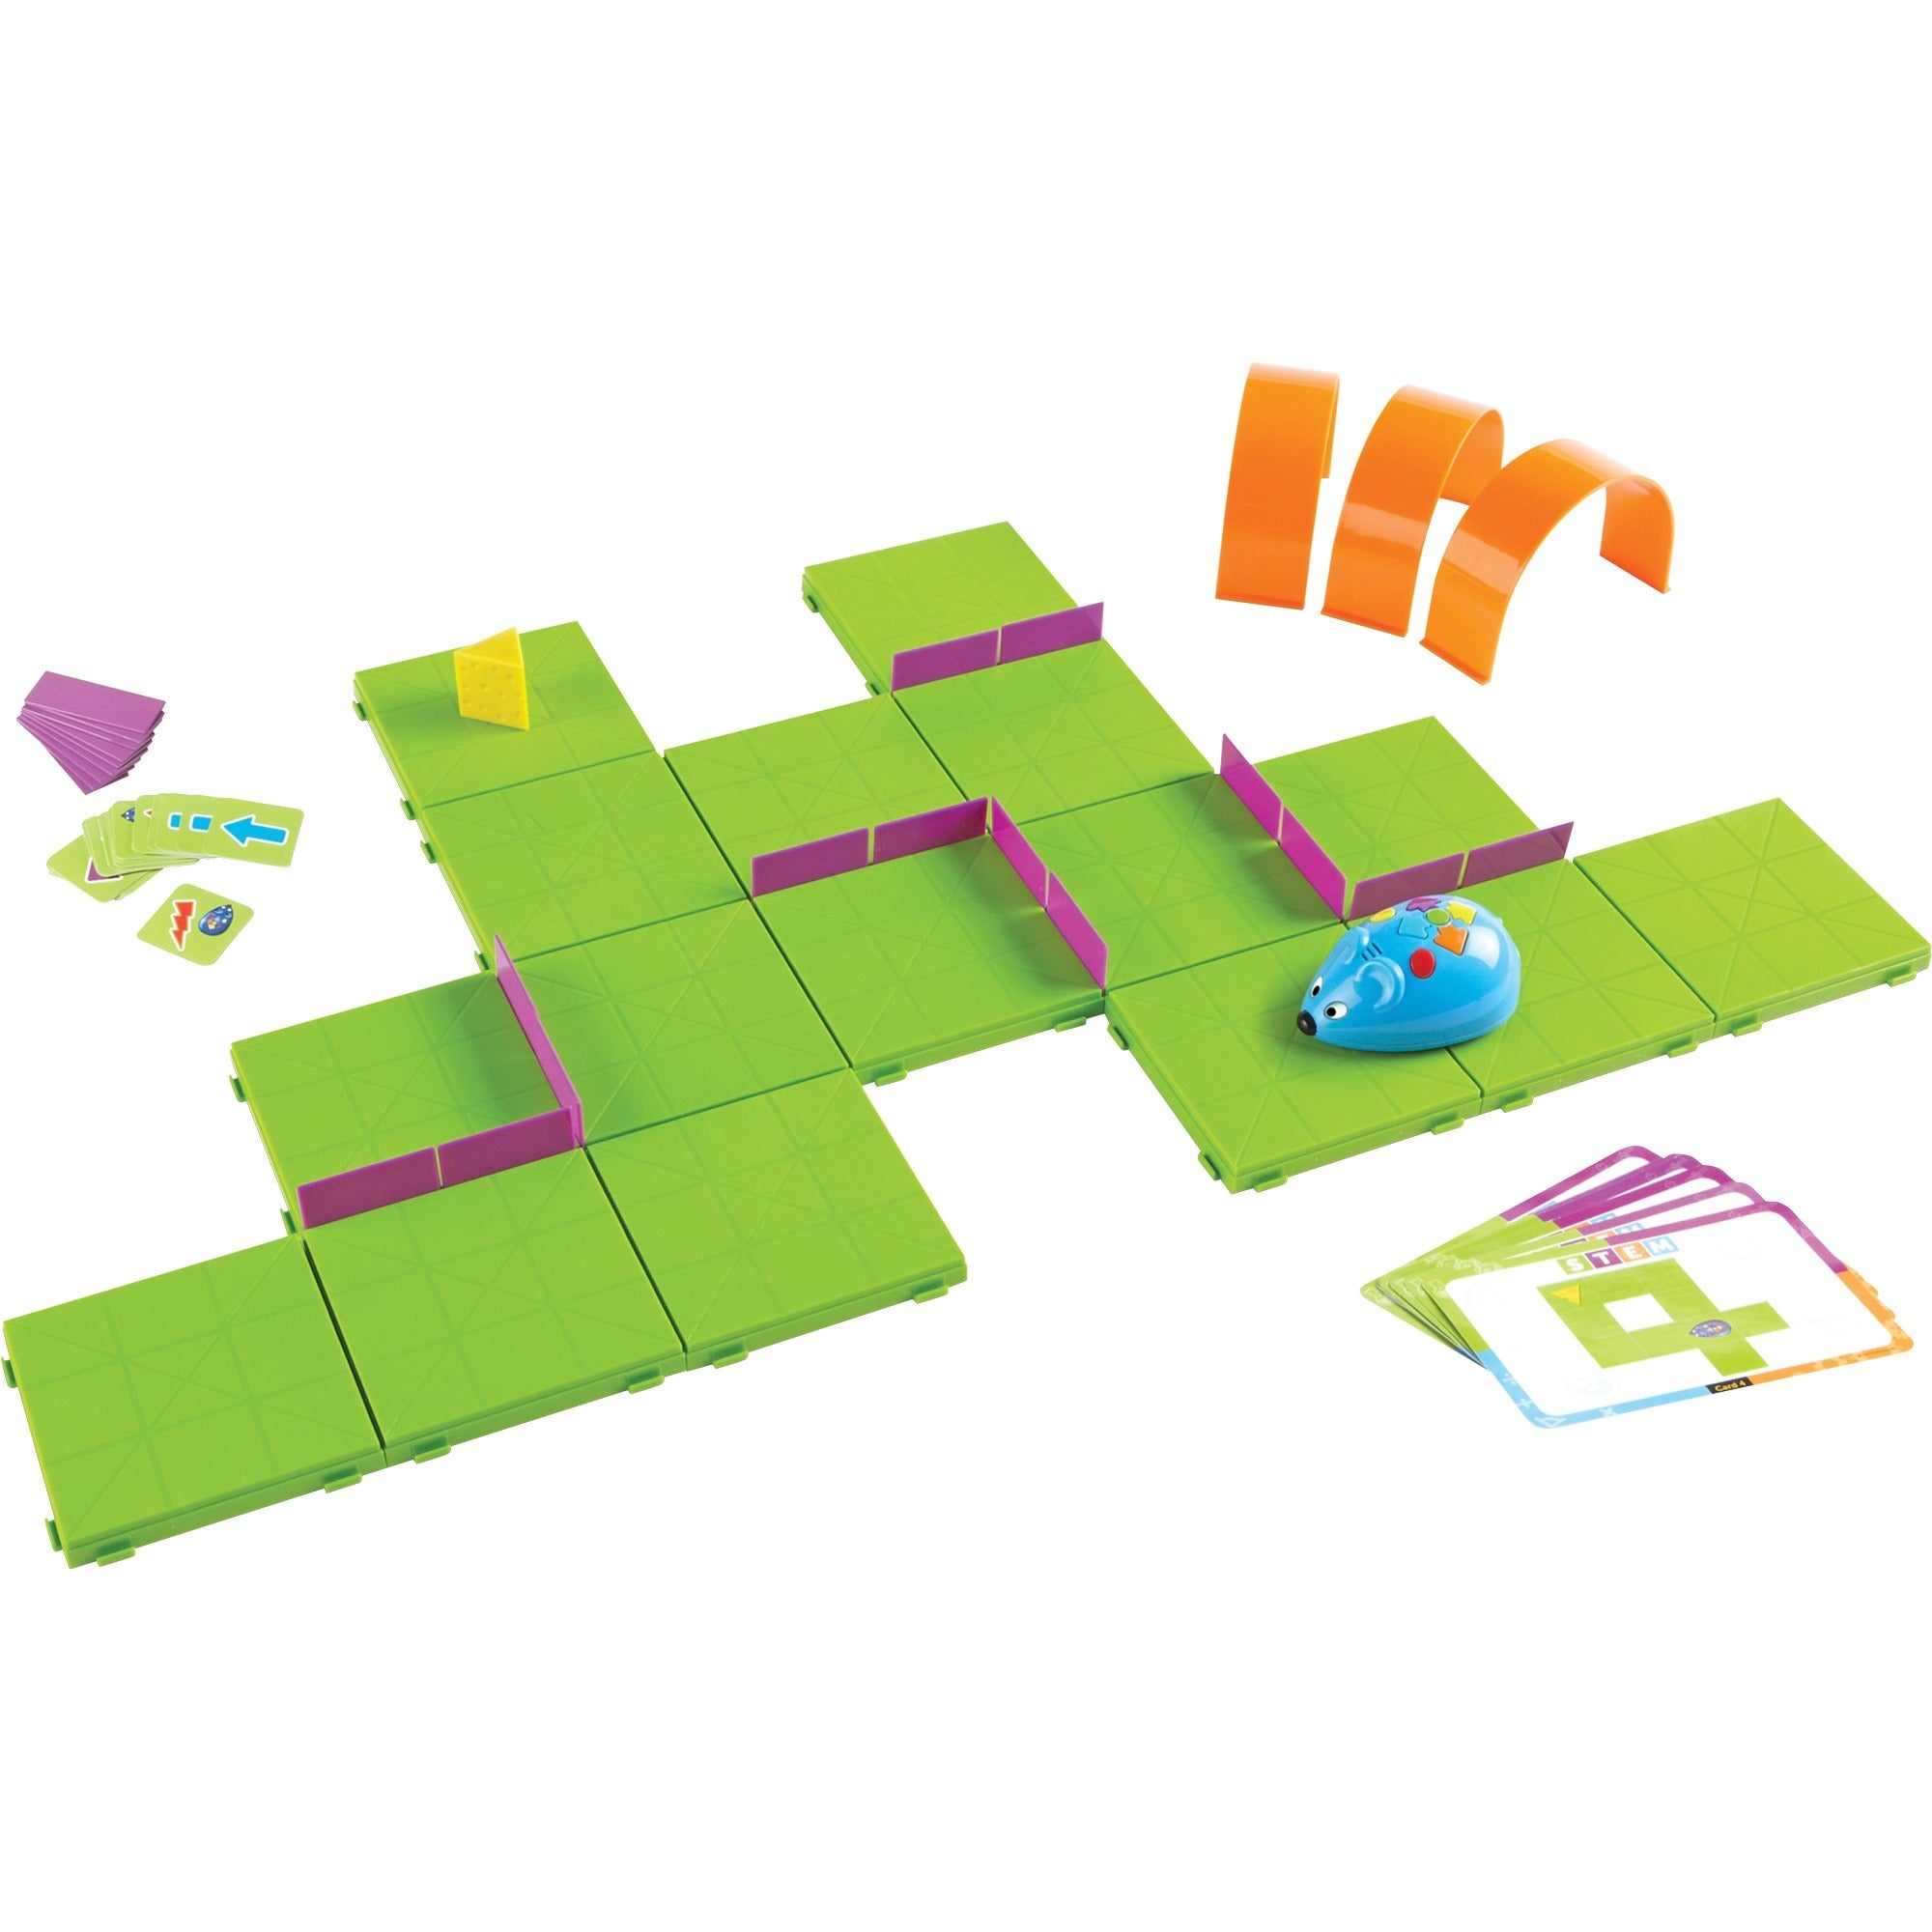 learning-resources-code-go-robot-mouse-activity-set-theme-subject-learning-skill-learning-building-logic-critical-thinking-coding-5-year-&-up_lrnler2831 - 1